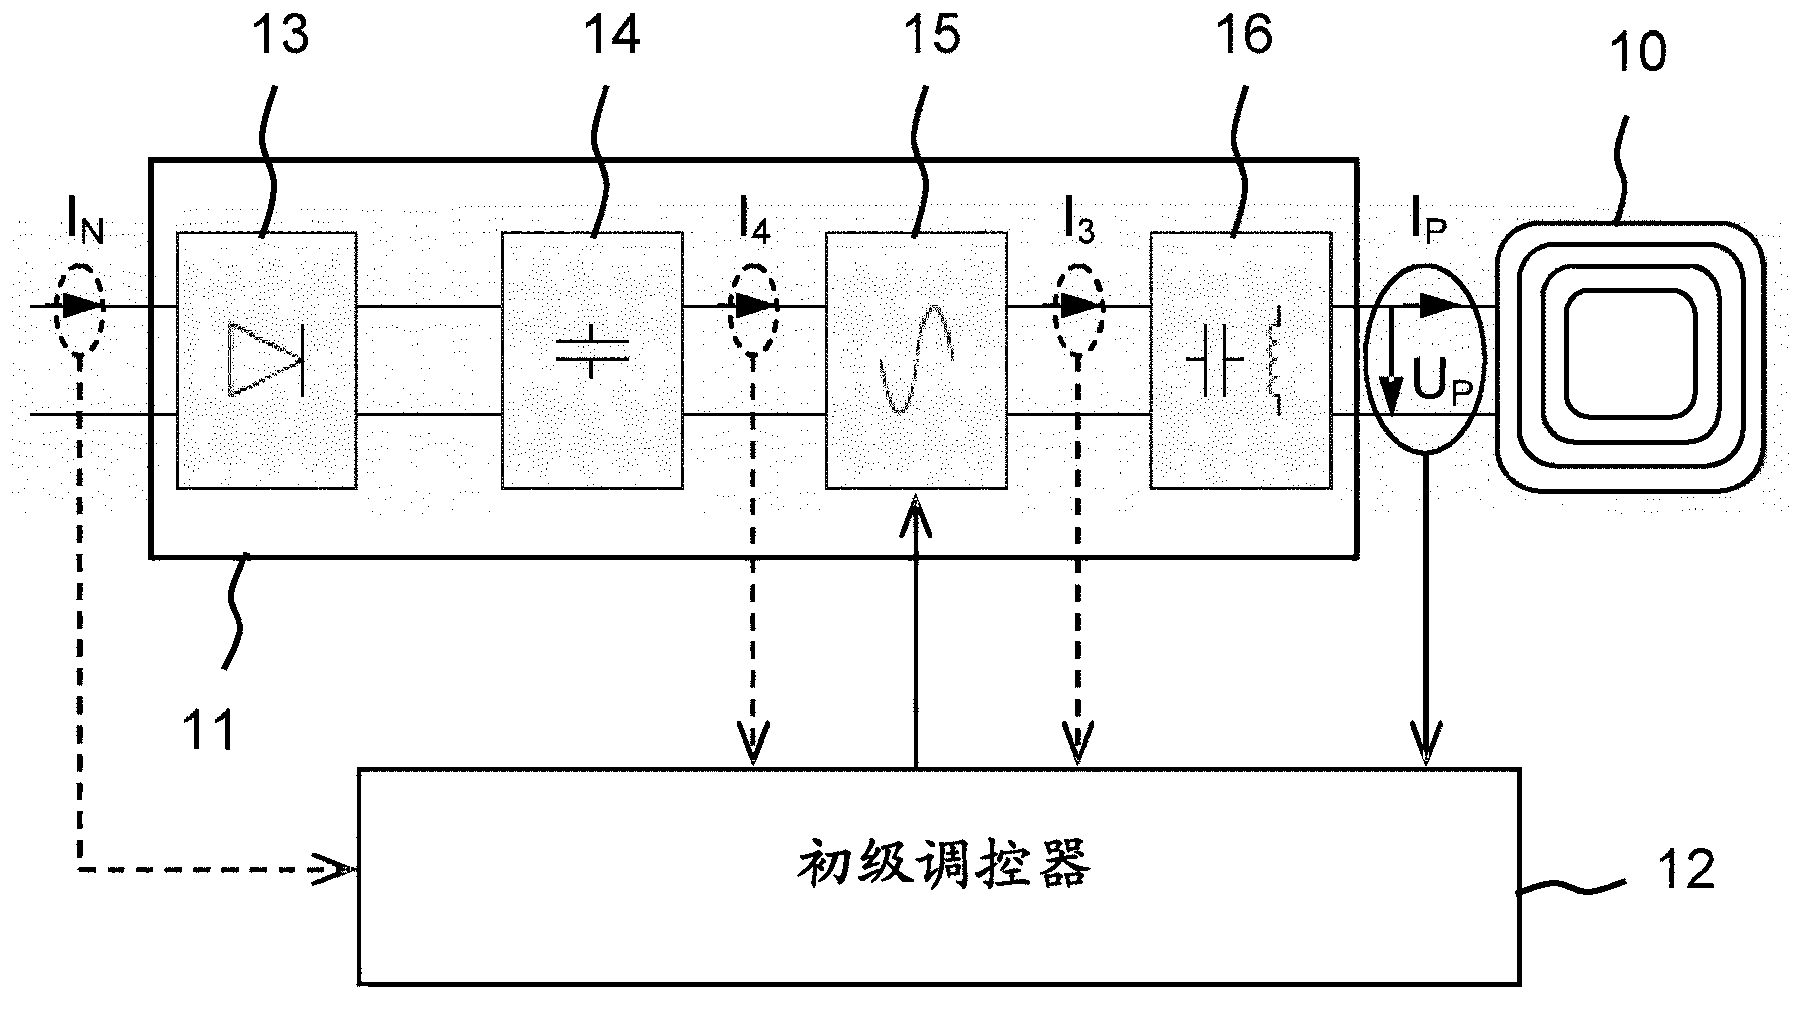 Device for the inductive transfer of electric energy